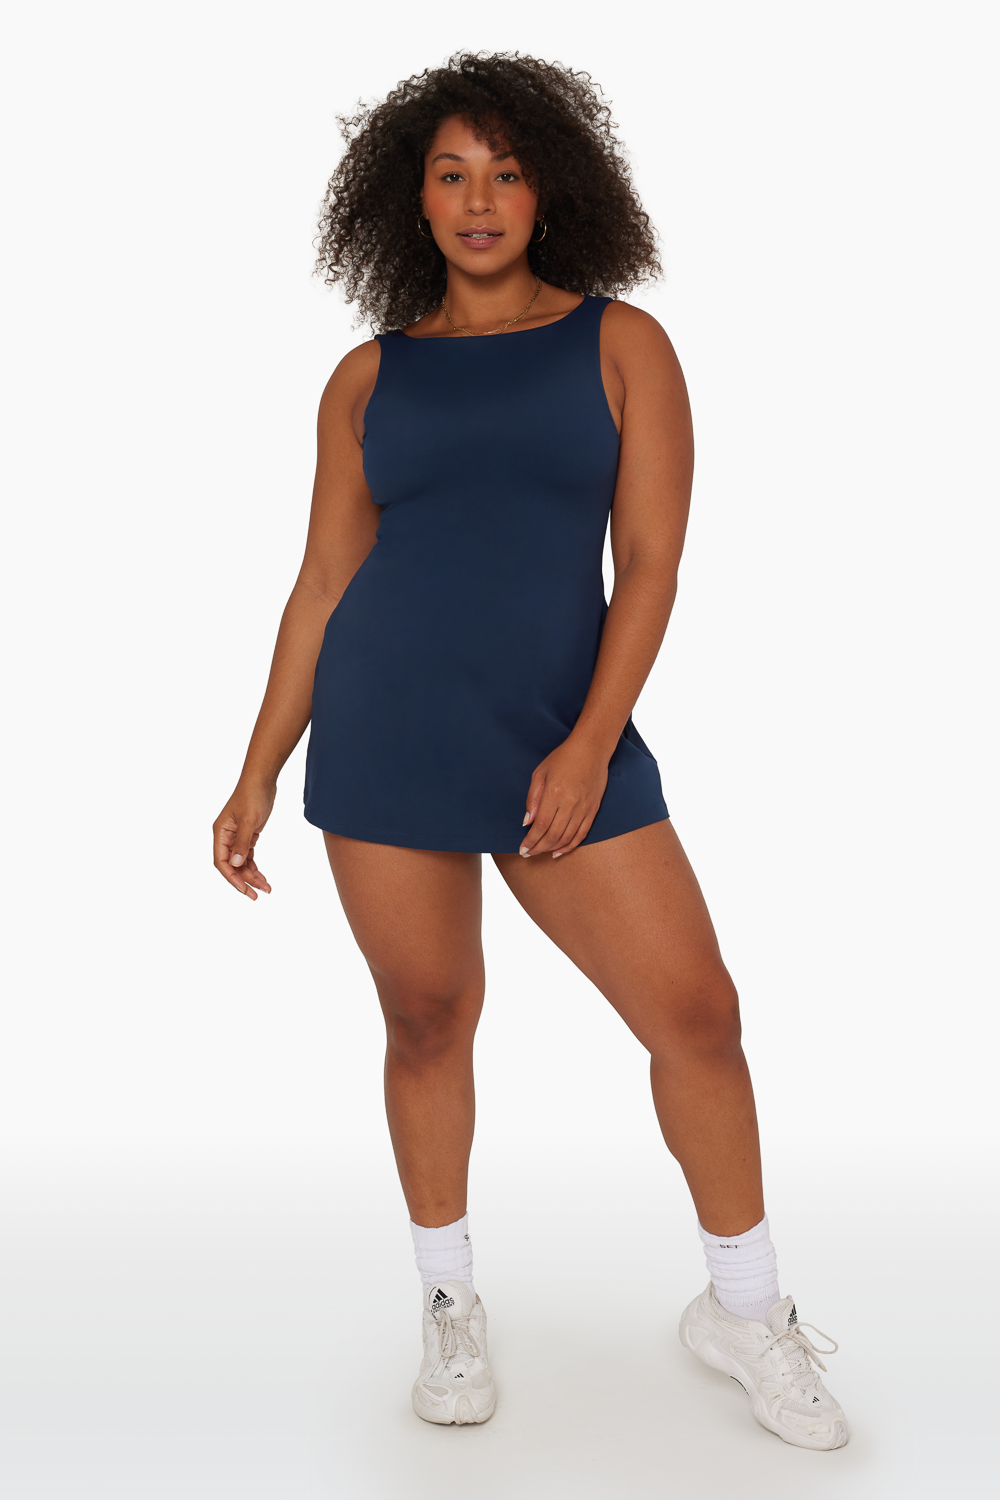 SPORTBODY® LOW BACK DRESS - EMPIRE Featured Image